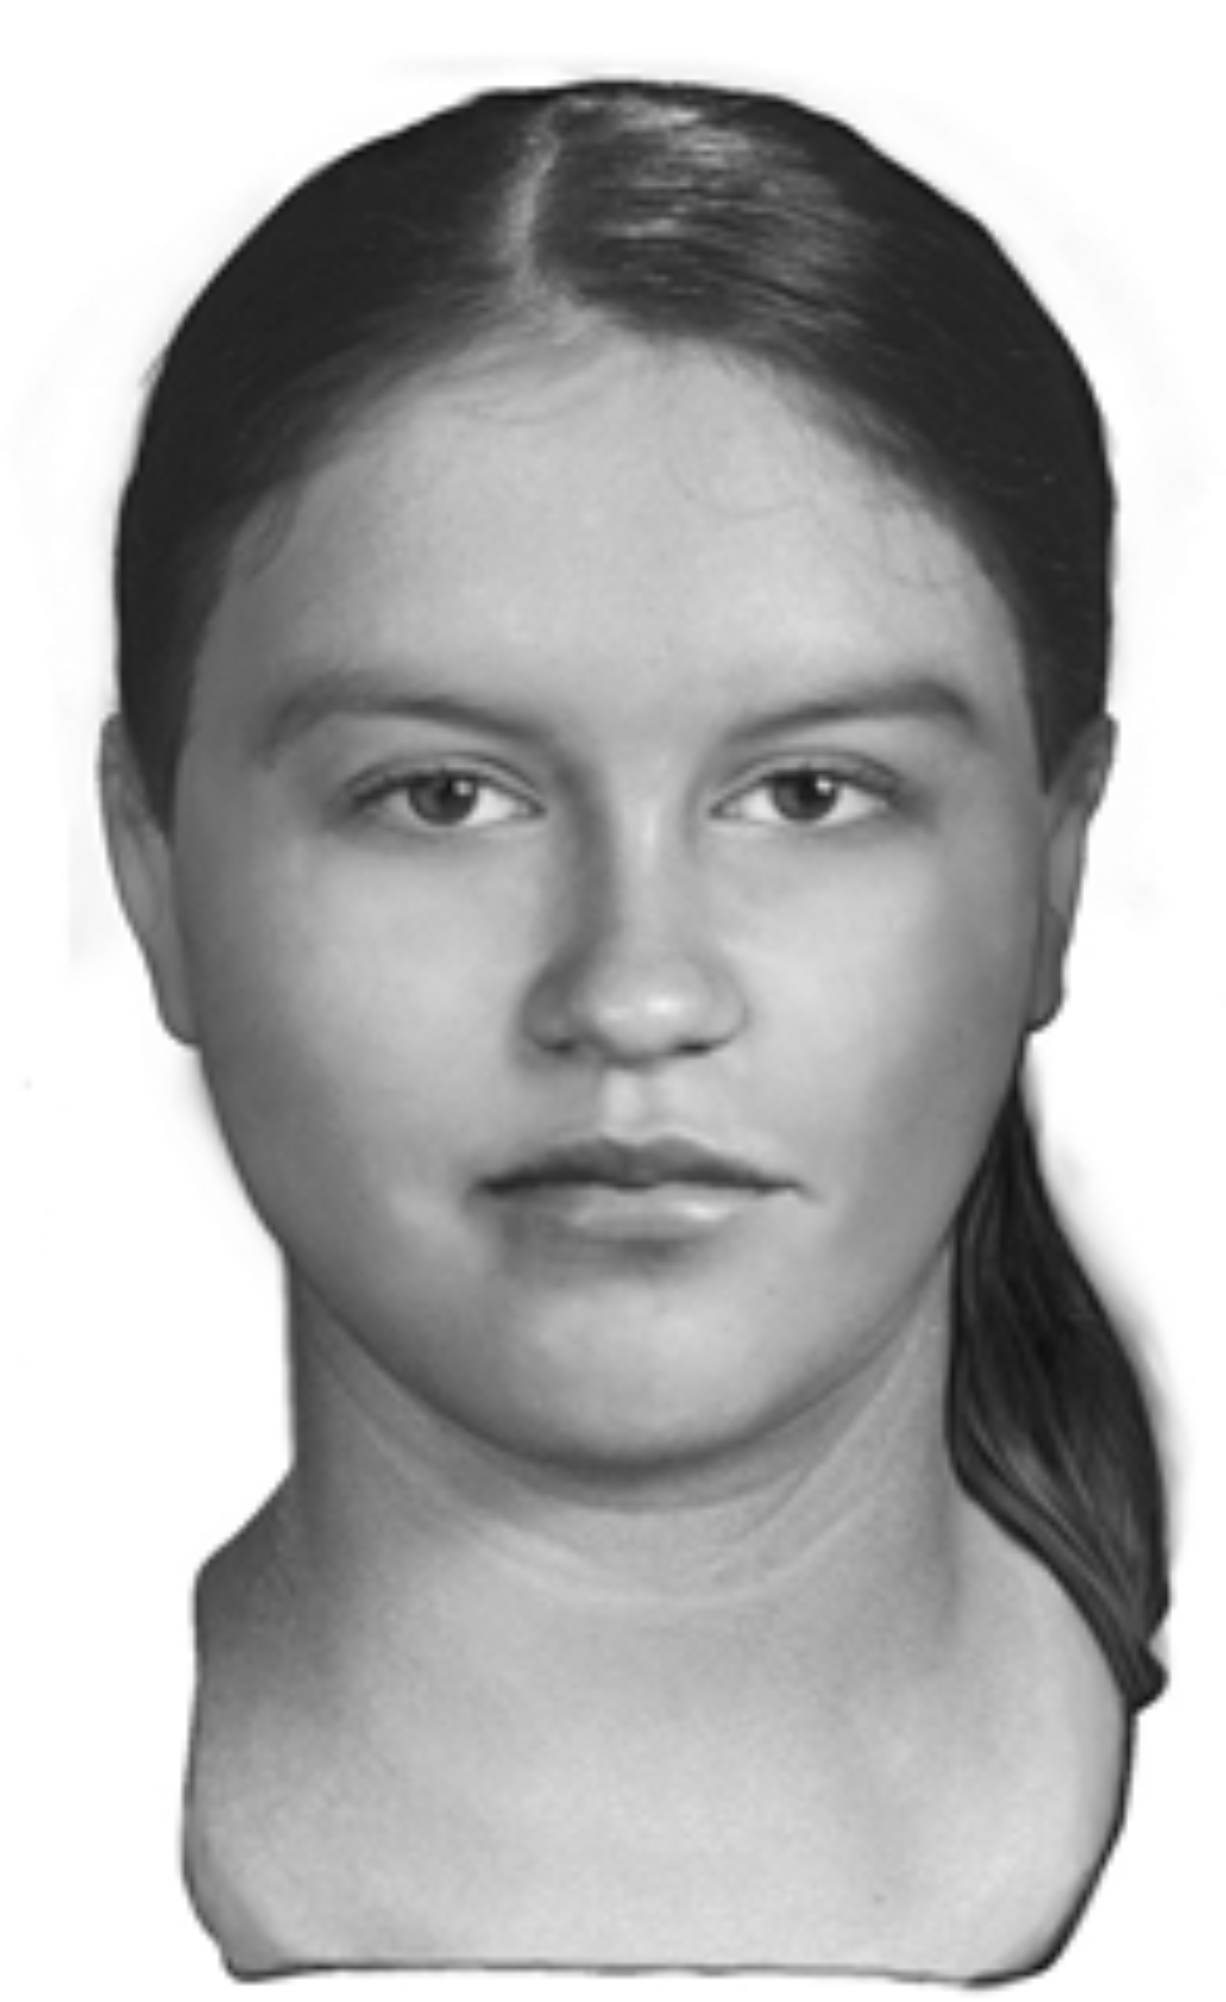 Forensic specialists have recreated the face of a teenage girl whose remains were found 36 years ago in north Clark County.